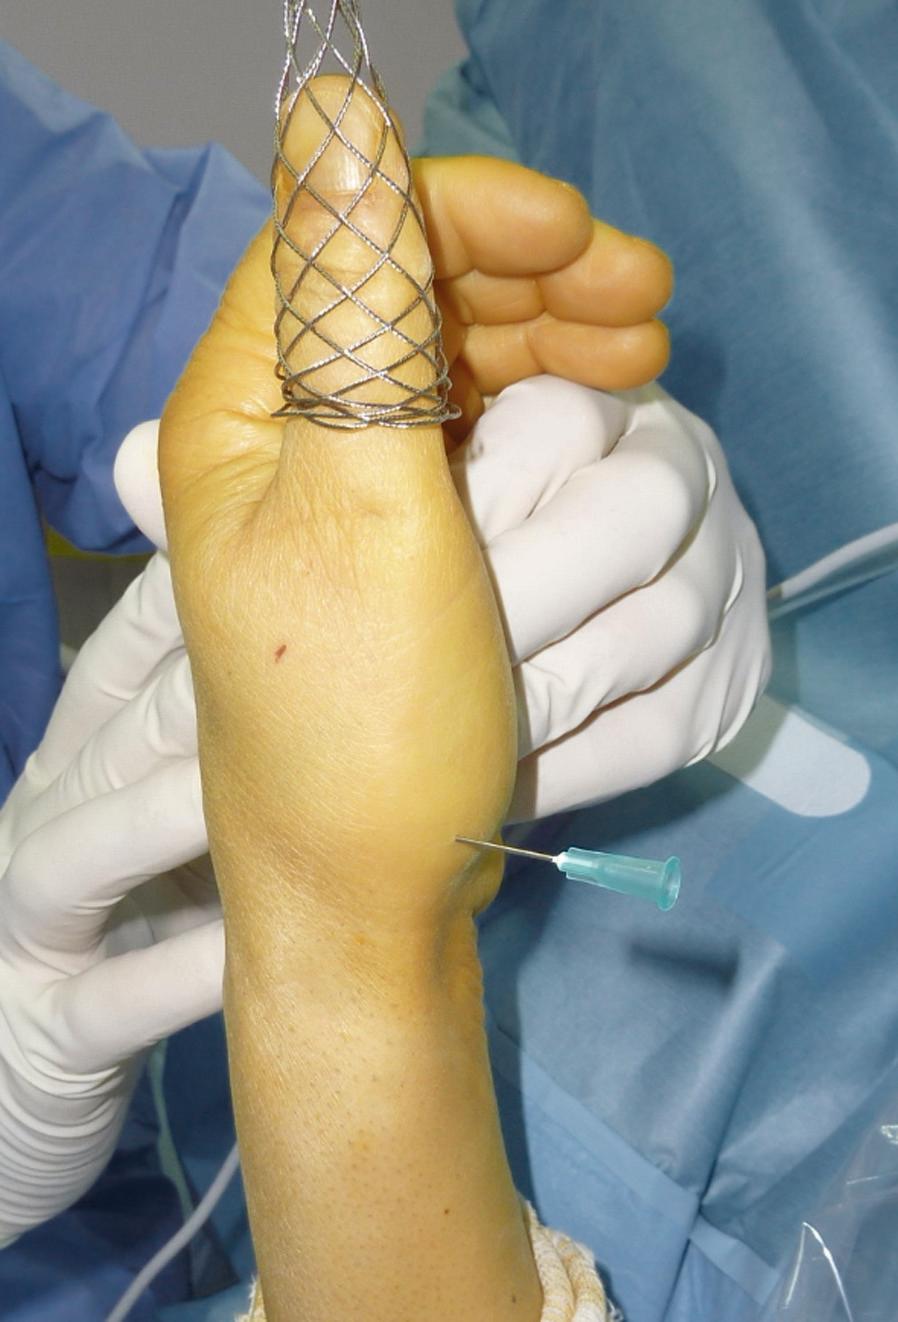 Chapter 24 Arthroscopic Thumb Carpometacarpal Interposition Arthroplasty Introduction Osteoarthritis in the thumb carpometacarpal (CMC) joint is a common condition, especially in women over 60 years